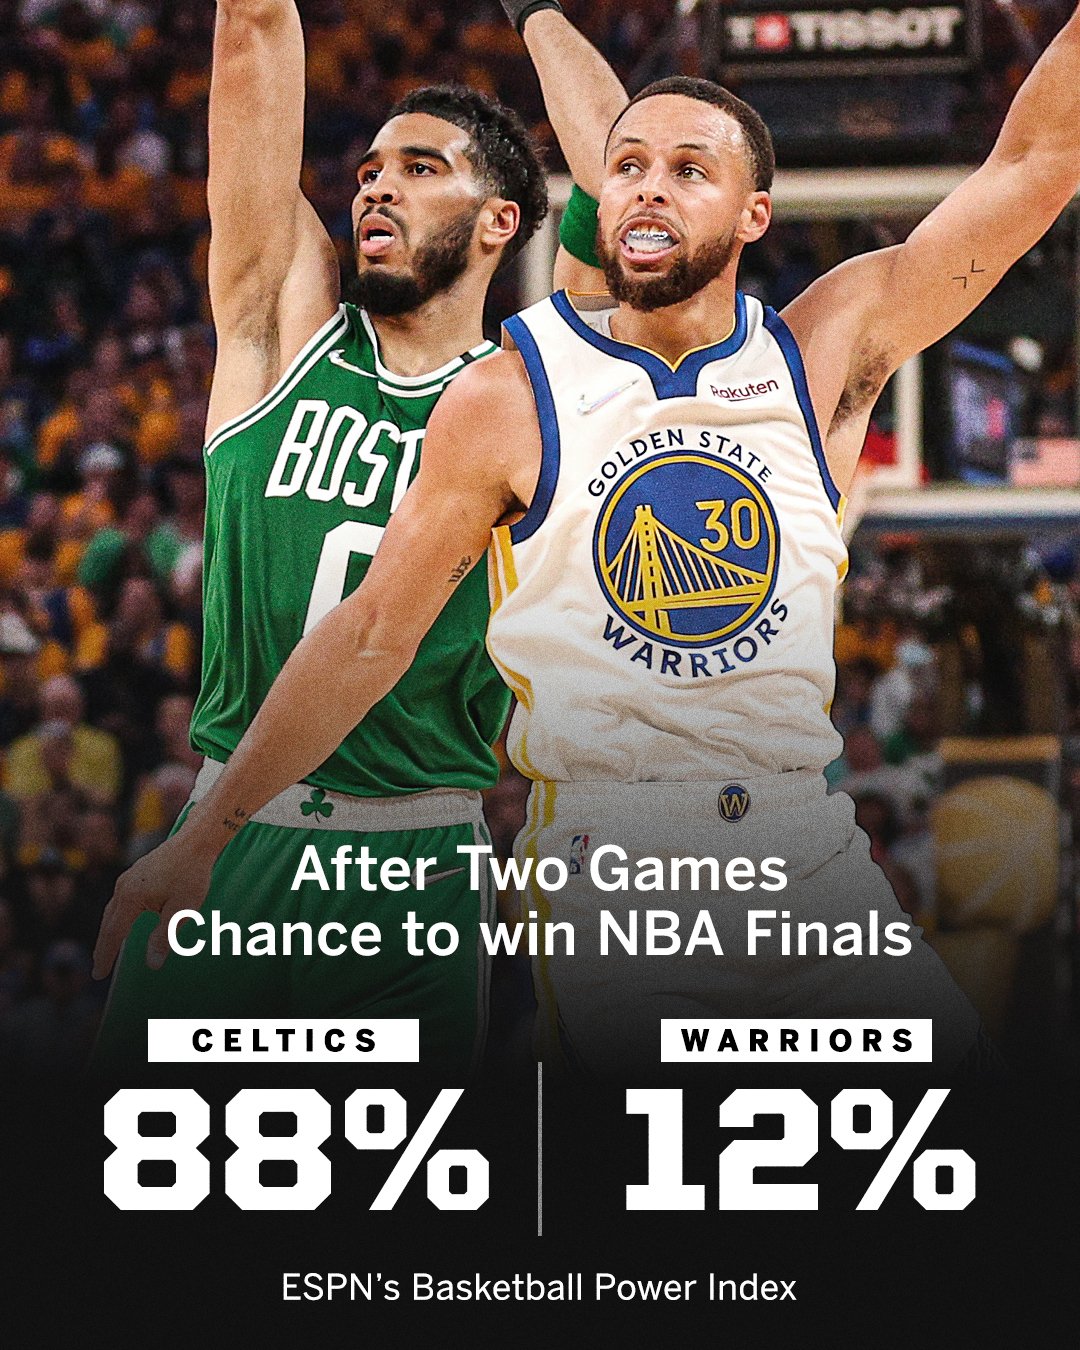 SportsCenter on X: After two games, the Celtics still have a strong chance  to beat the Warriors, according to ESPN's BPI 📝 https://t.co/6105XlIiuV /  X